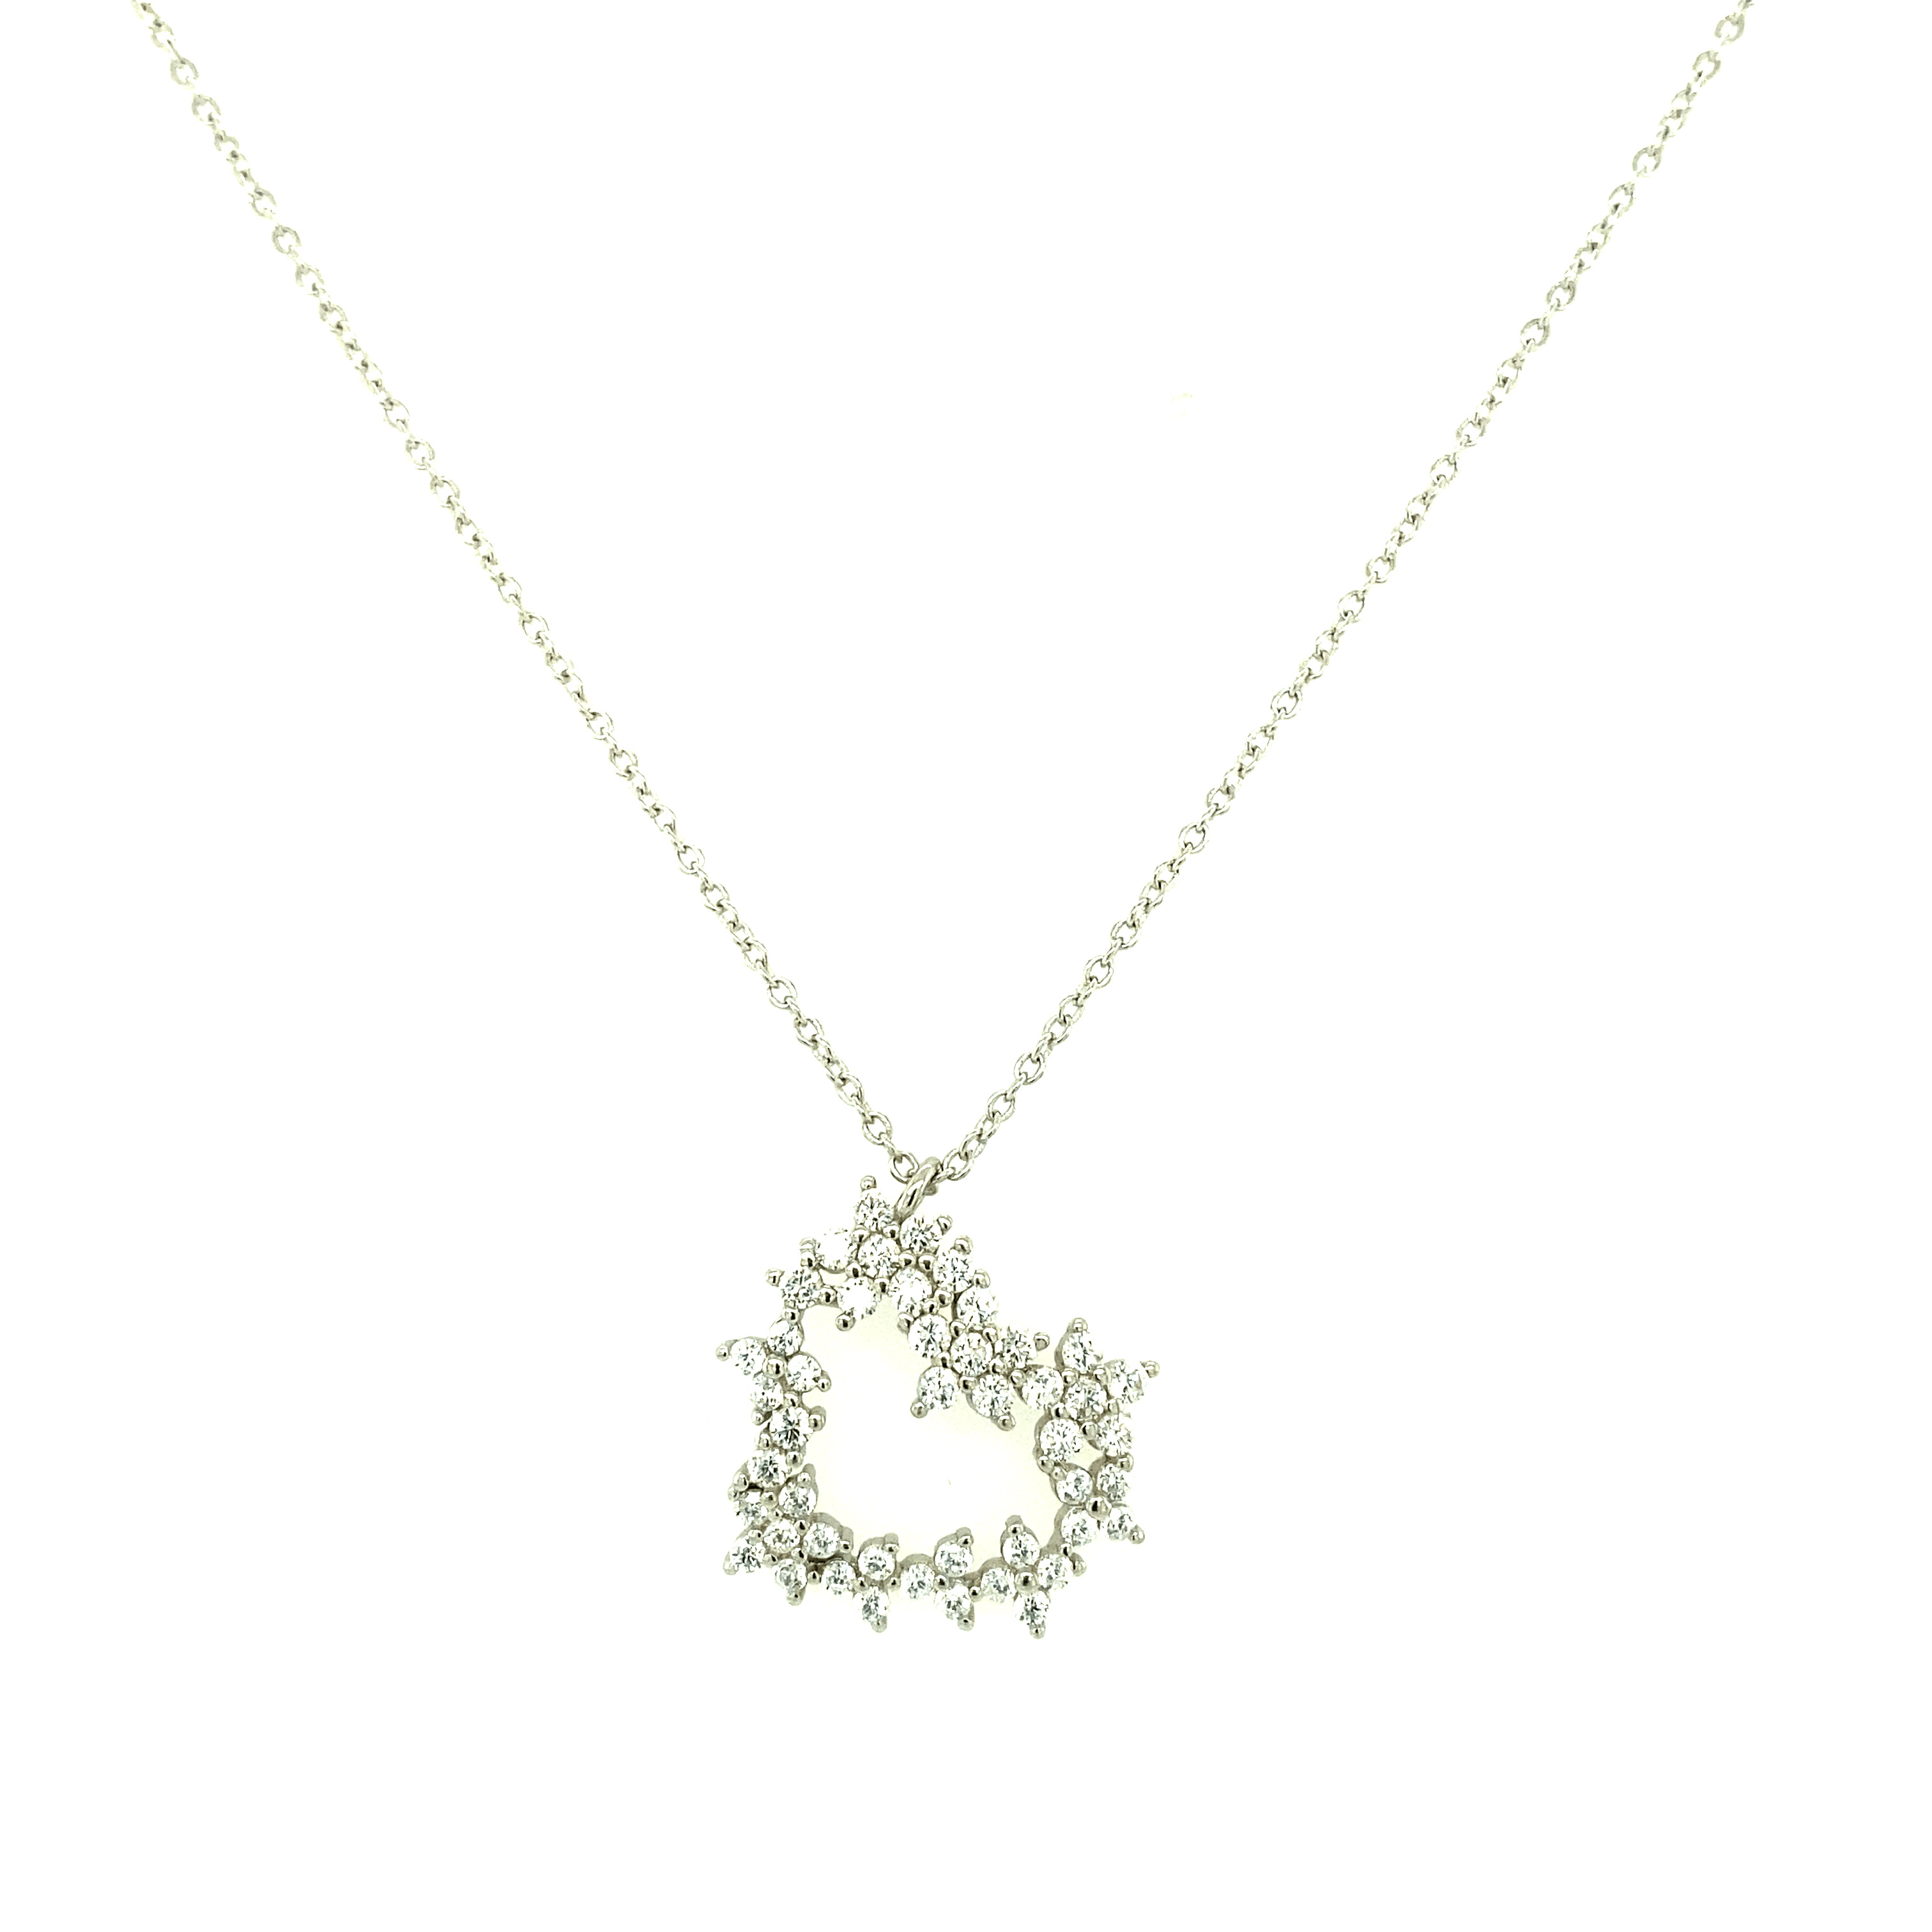 Asfour-Crystal-Silver-accessoriesNecklace-N1707-925-Sterling-Silver